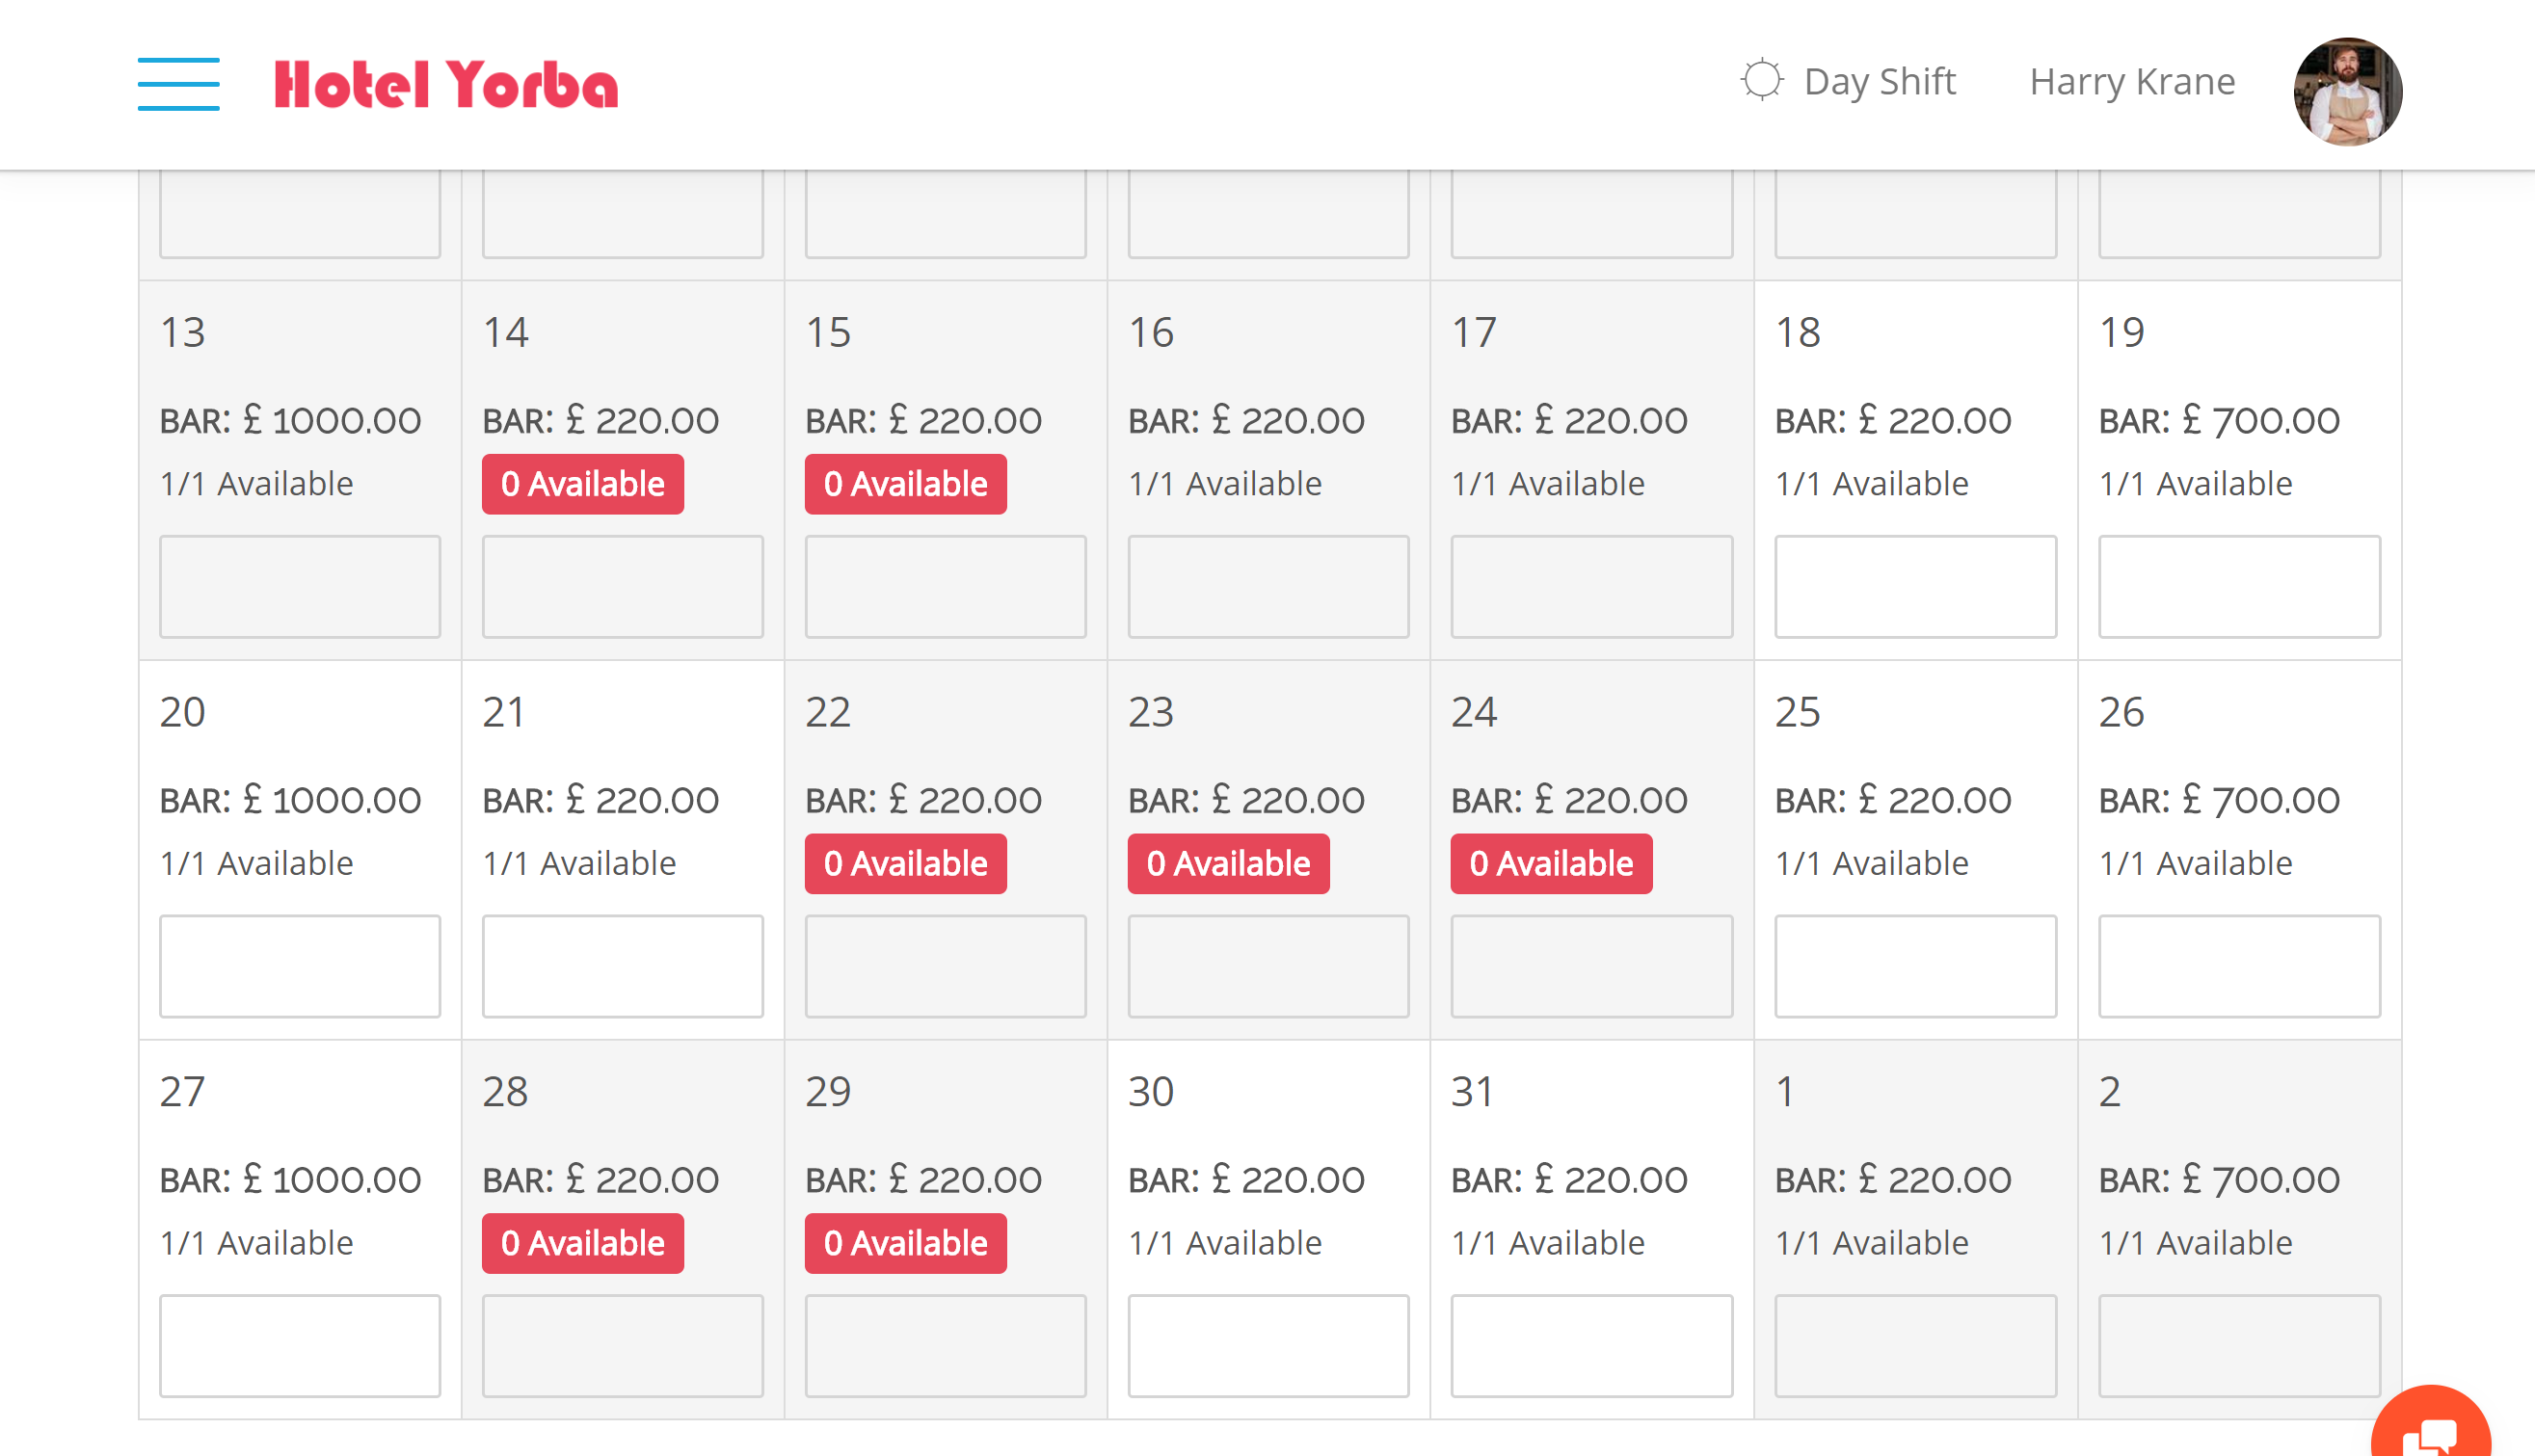 MyAllocator Calendar by Bellebnb.com calendar, with the BAR used in your Front Desk and Booking Engine along with the number of rooms available for each type for each date.